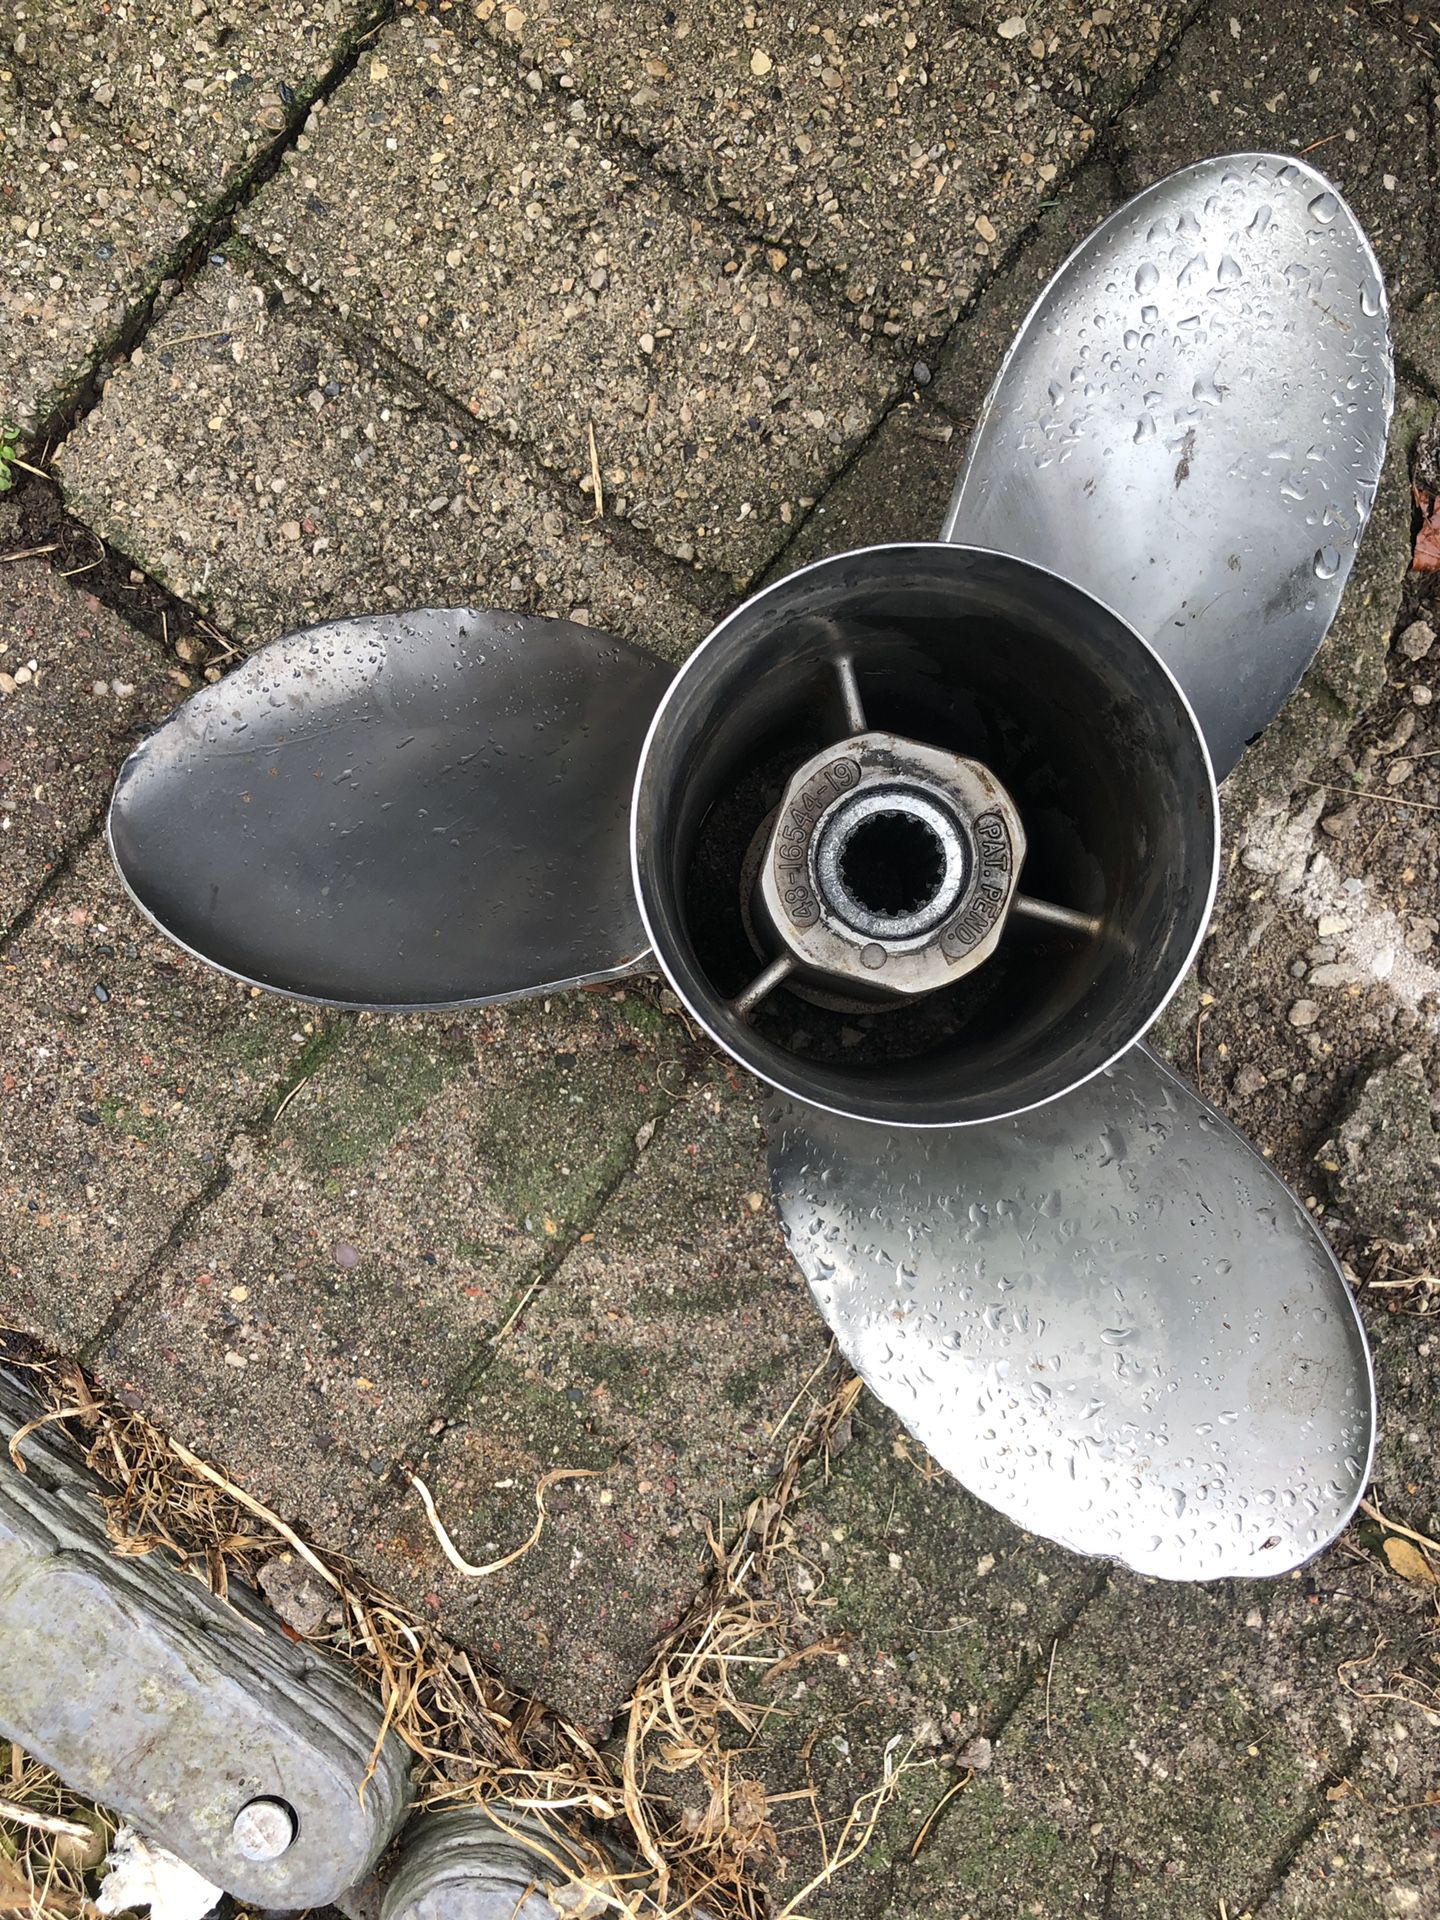 Mercury Stainless Steel 19 pitch prop, minor dings, $150